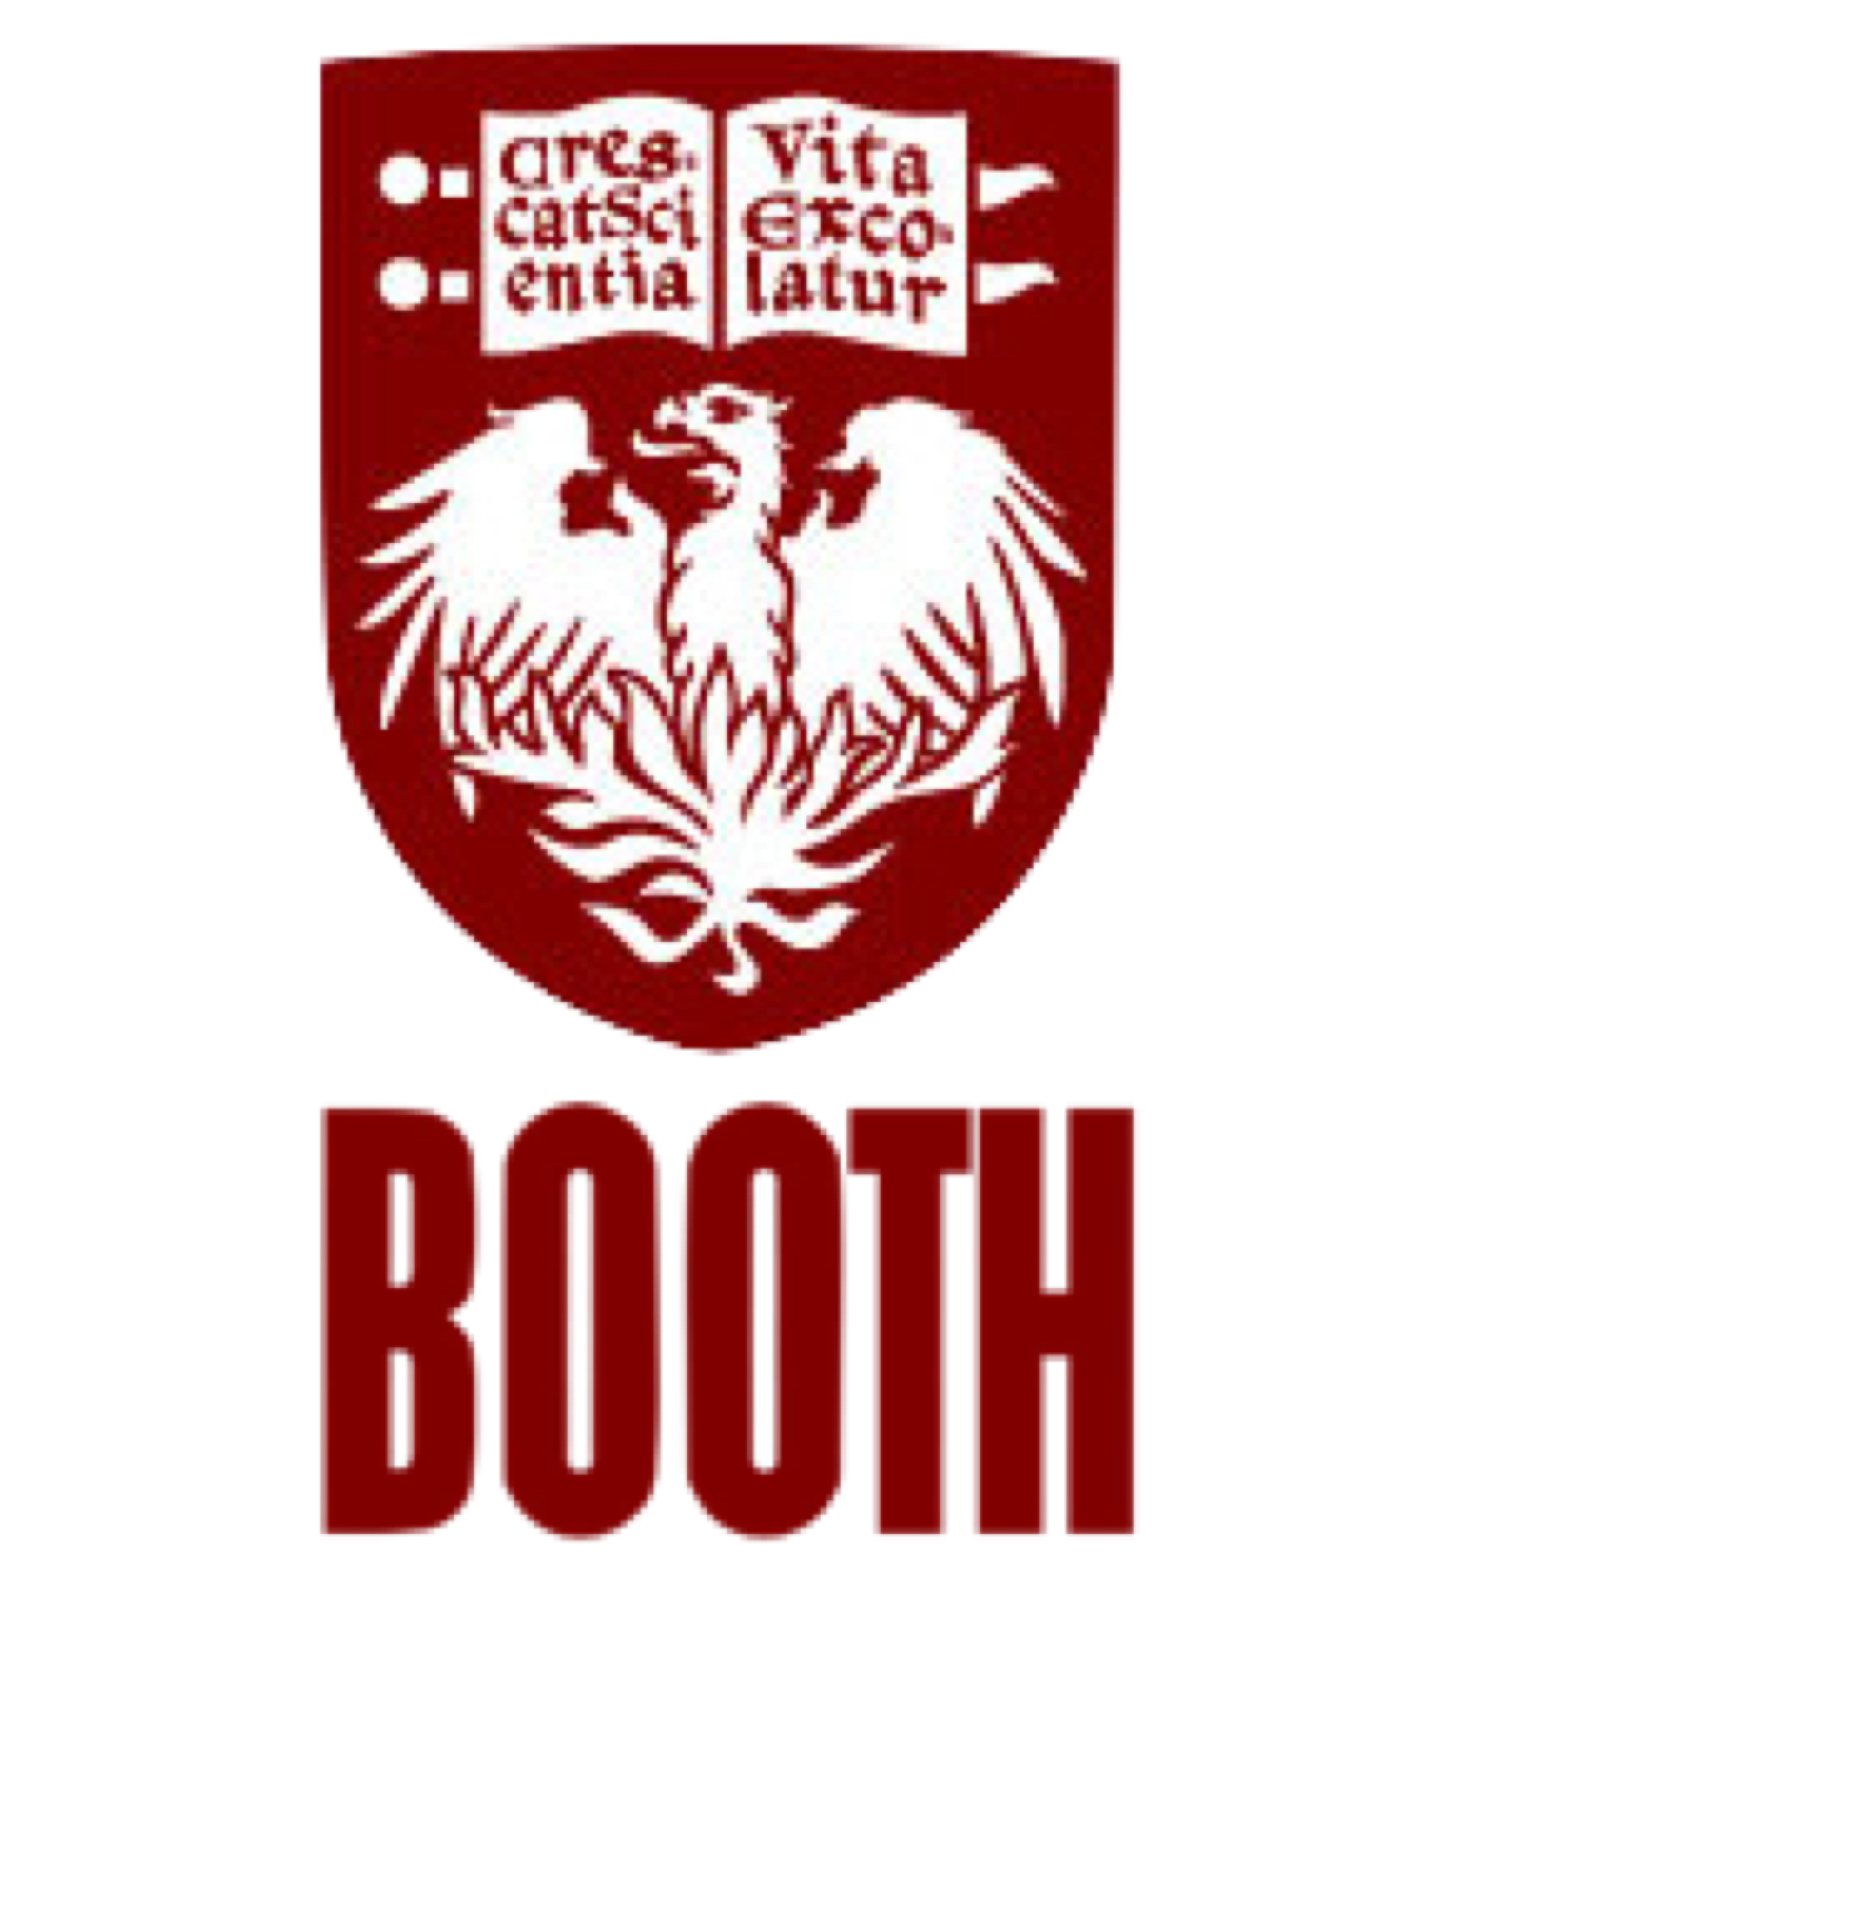 University of Chicago Booth School of Business